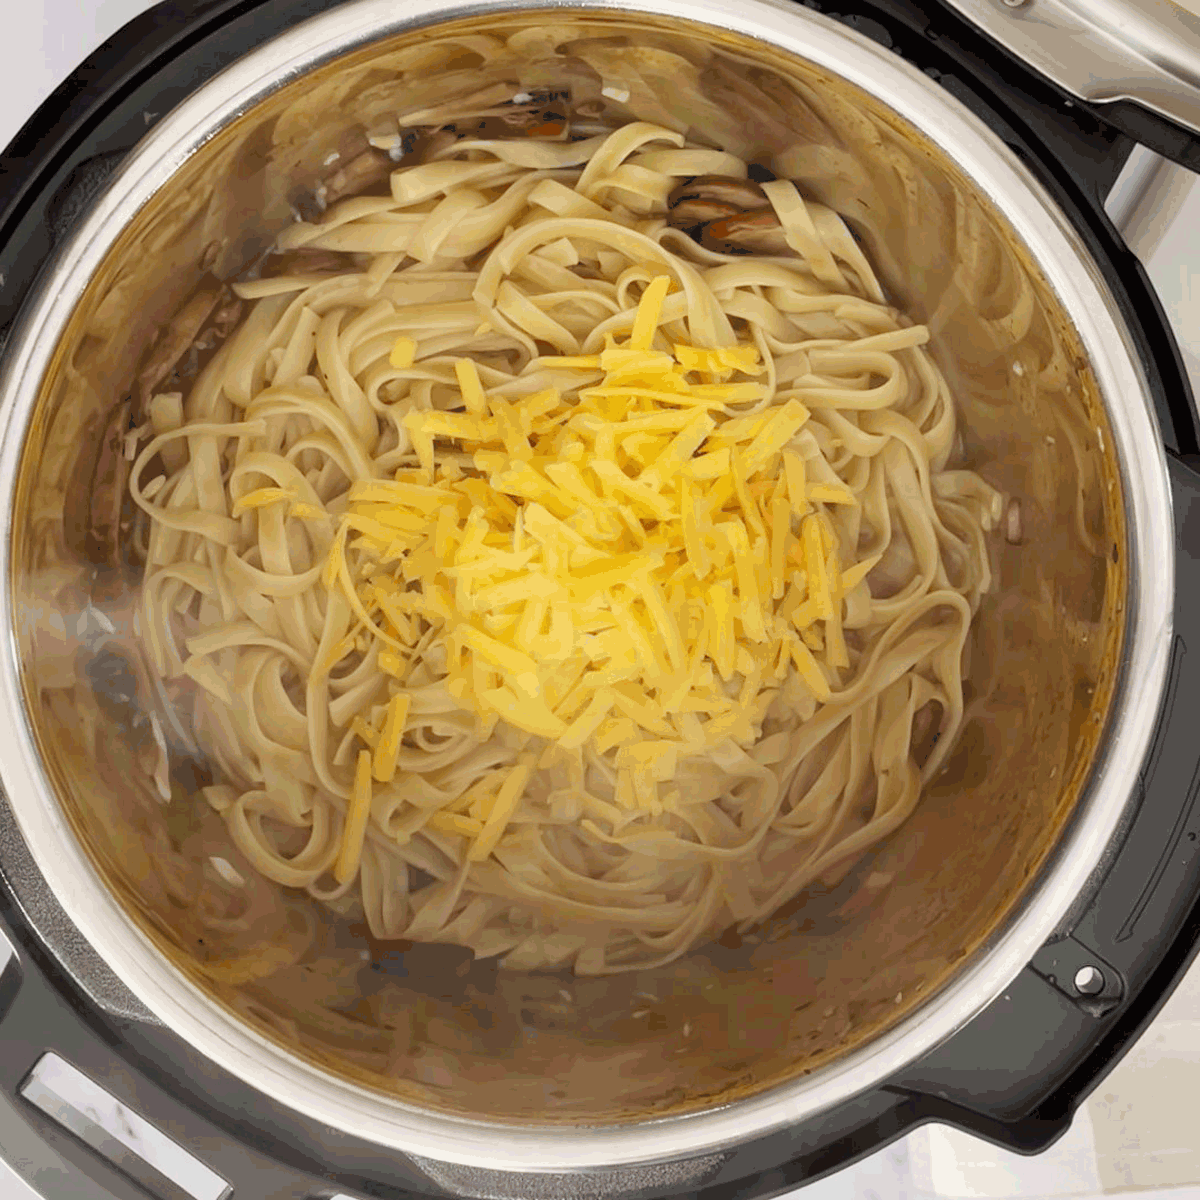 Add cheddar cheese to boiled pasta.